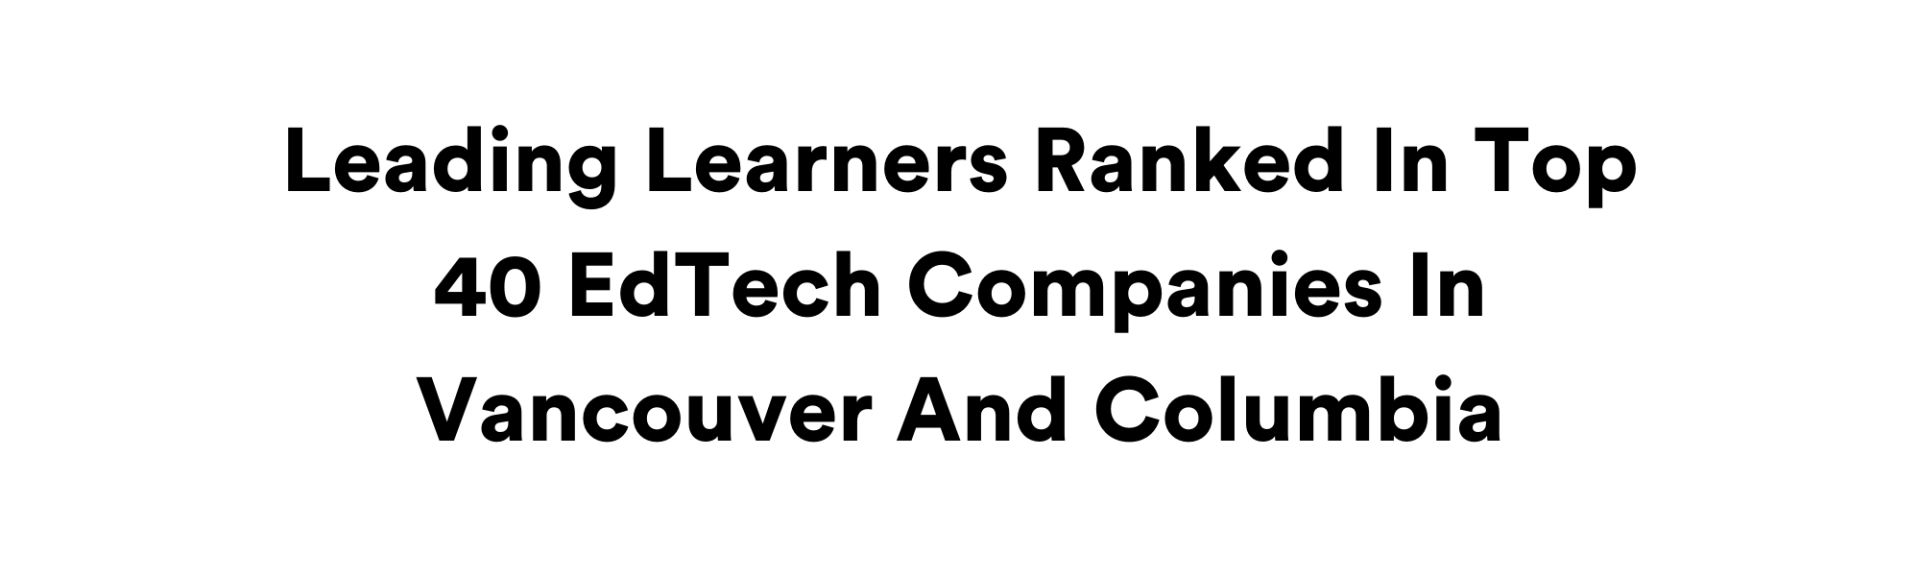 Leading Learners Ranked In Top 40 EdTech Companies In Vancouver And Columbia